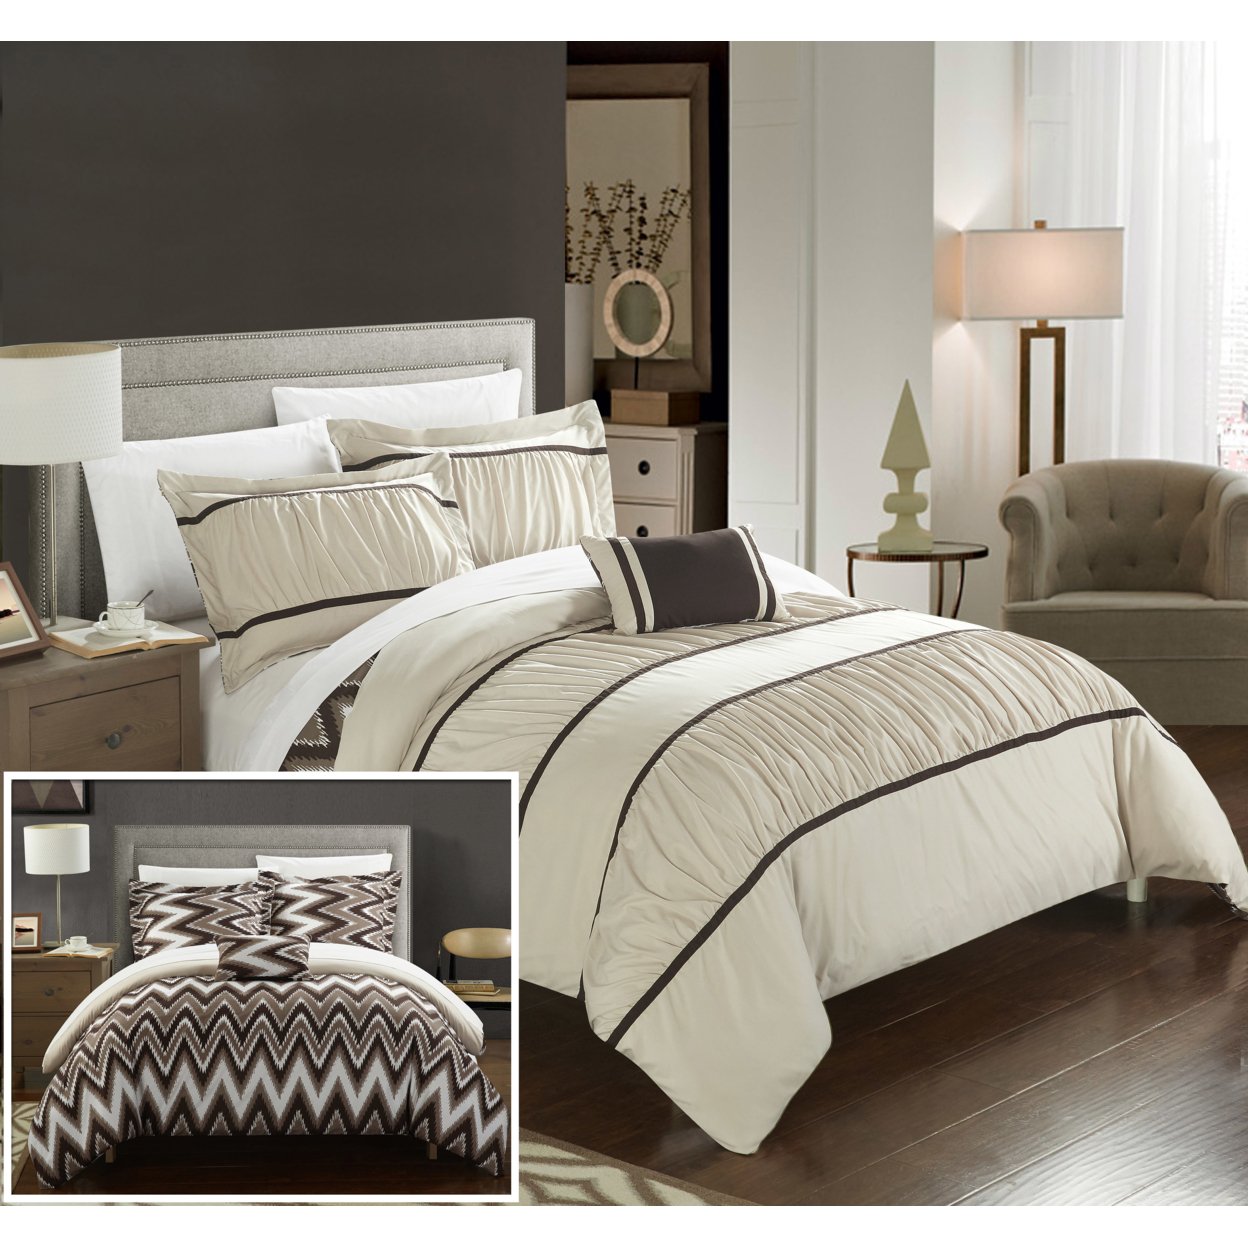 Chic Home 4 or 3 Piece Lucia Pleated and Ruffled with Chevron REVERSIBLE Backing Comforter Set